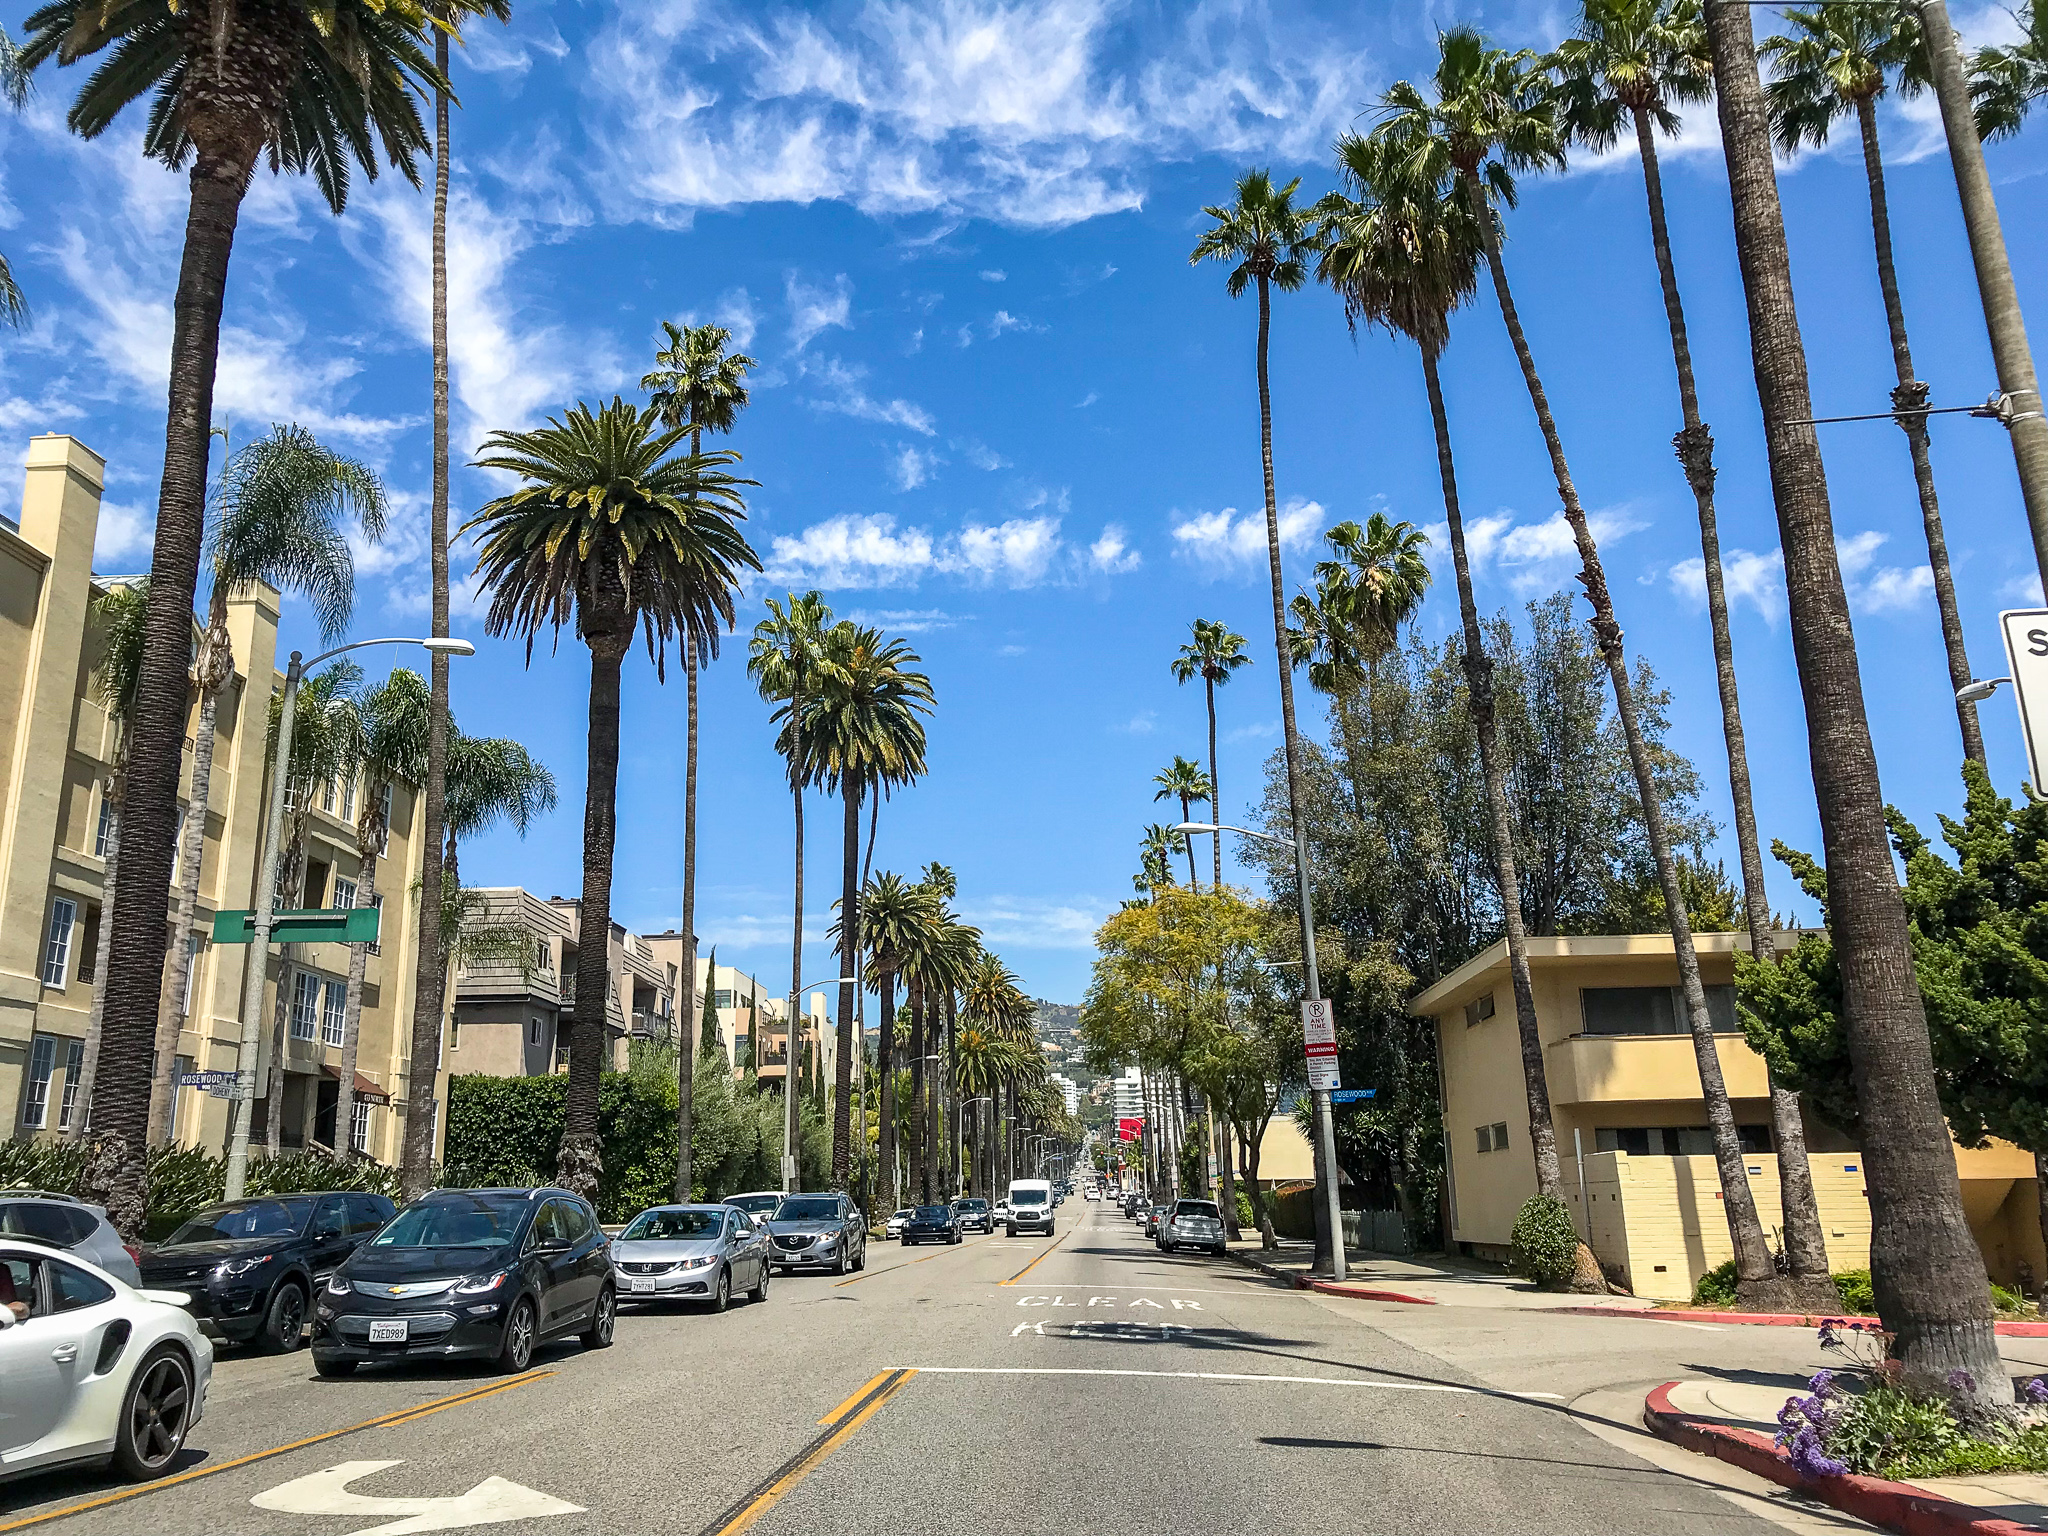 Best Neighborhood To Go On A Shopping Spree In Los Angeles - CBS Los Angeles